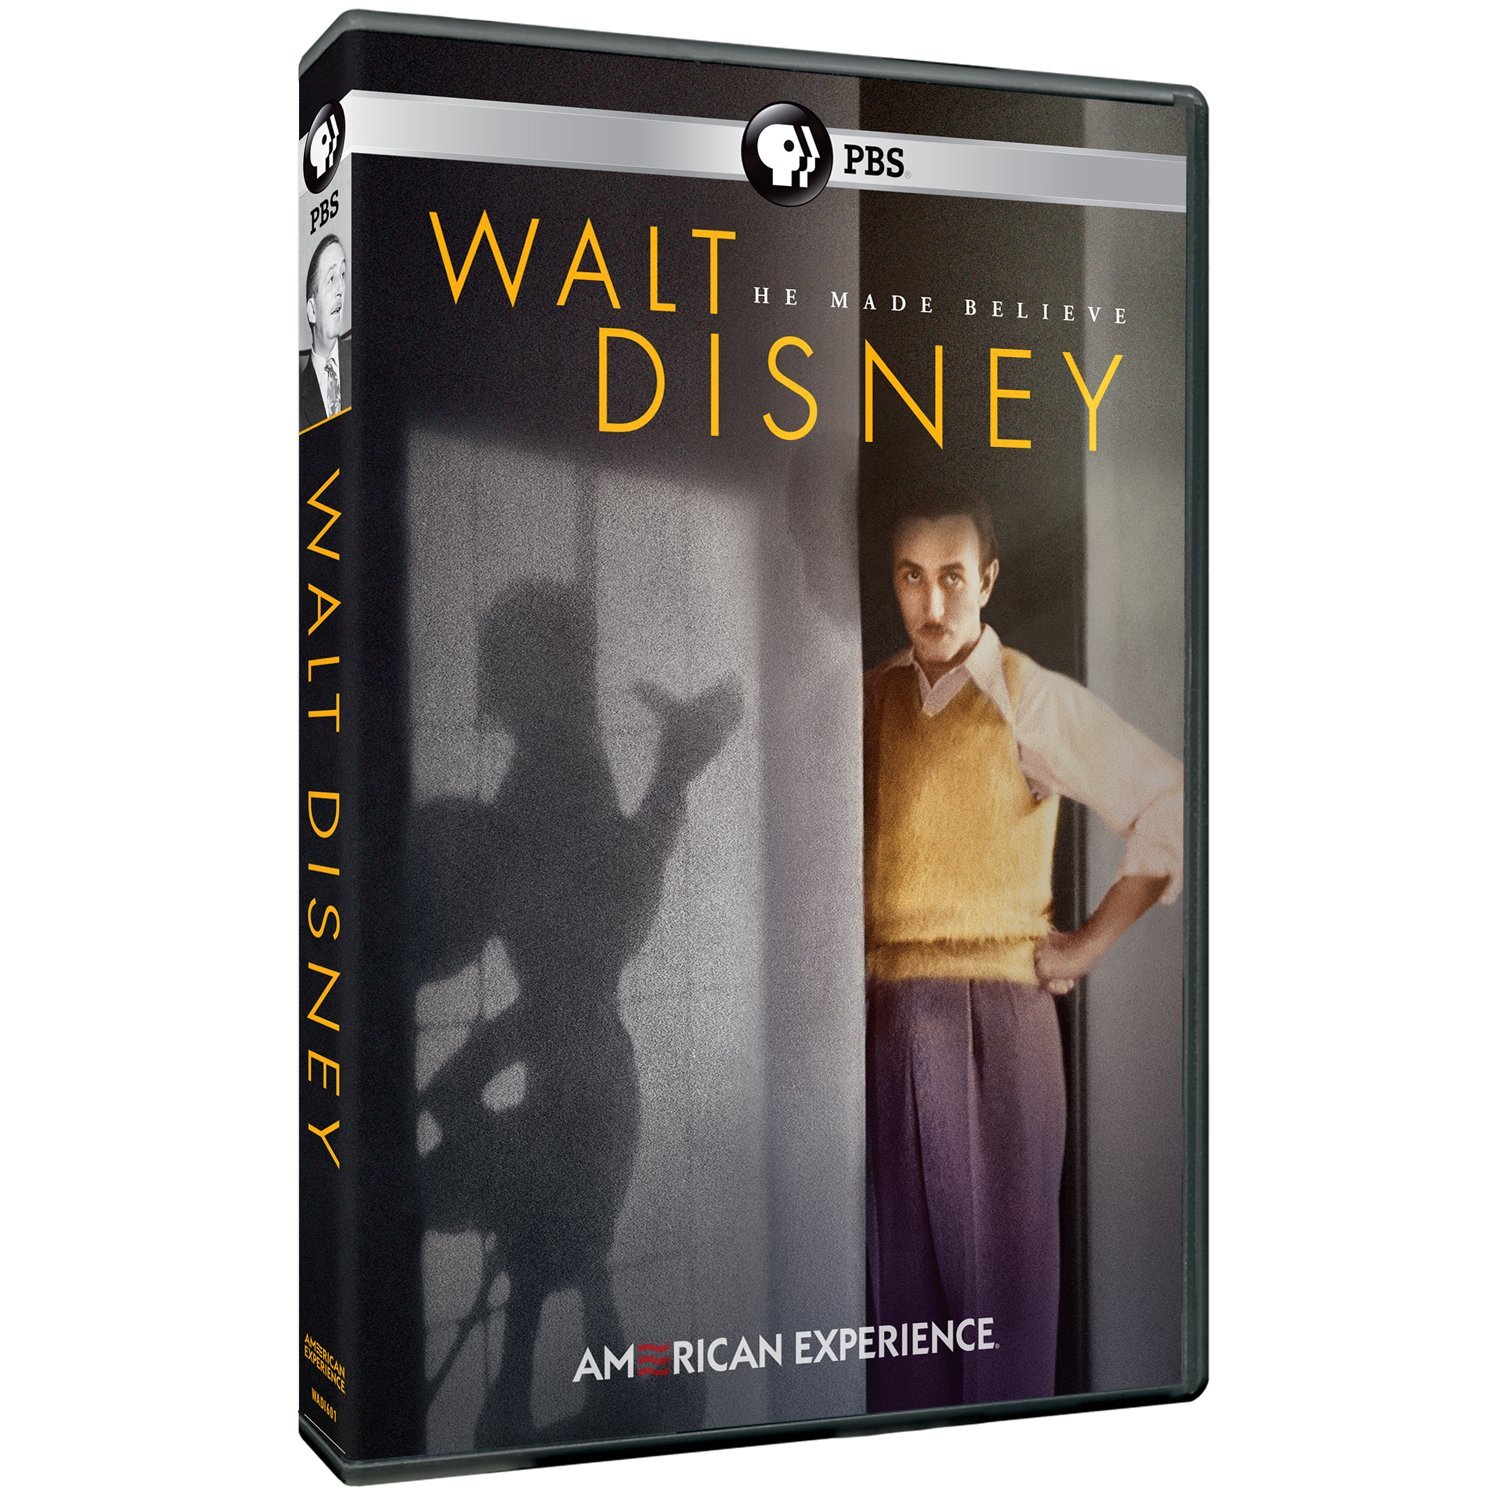 American Experience: Walt Disney DVD Review - LaughingPlace.com